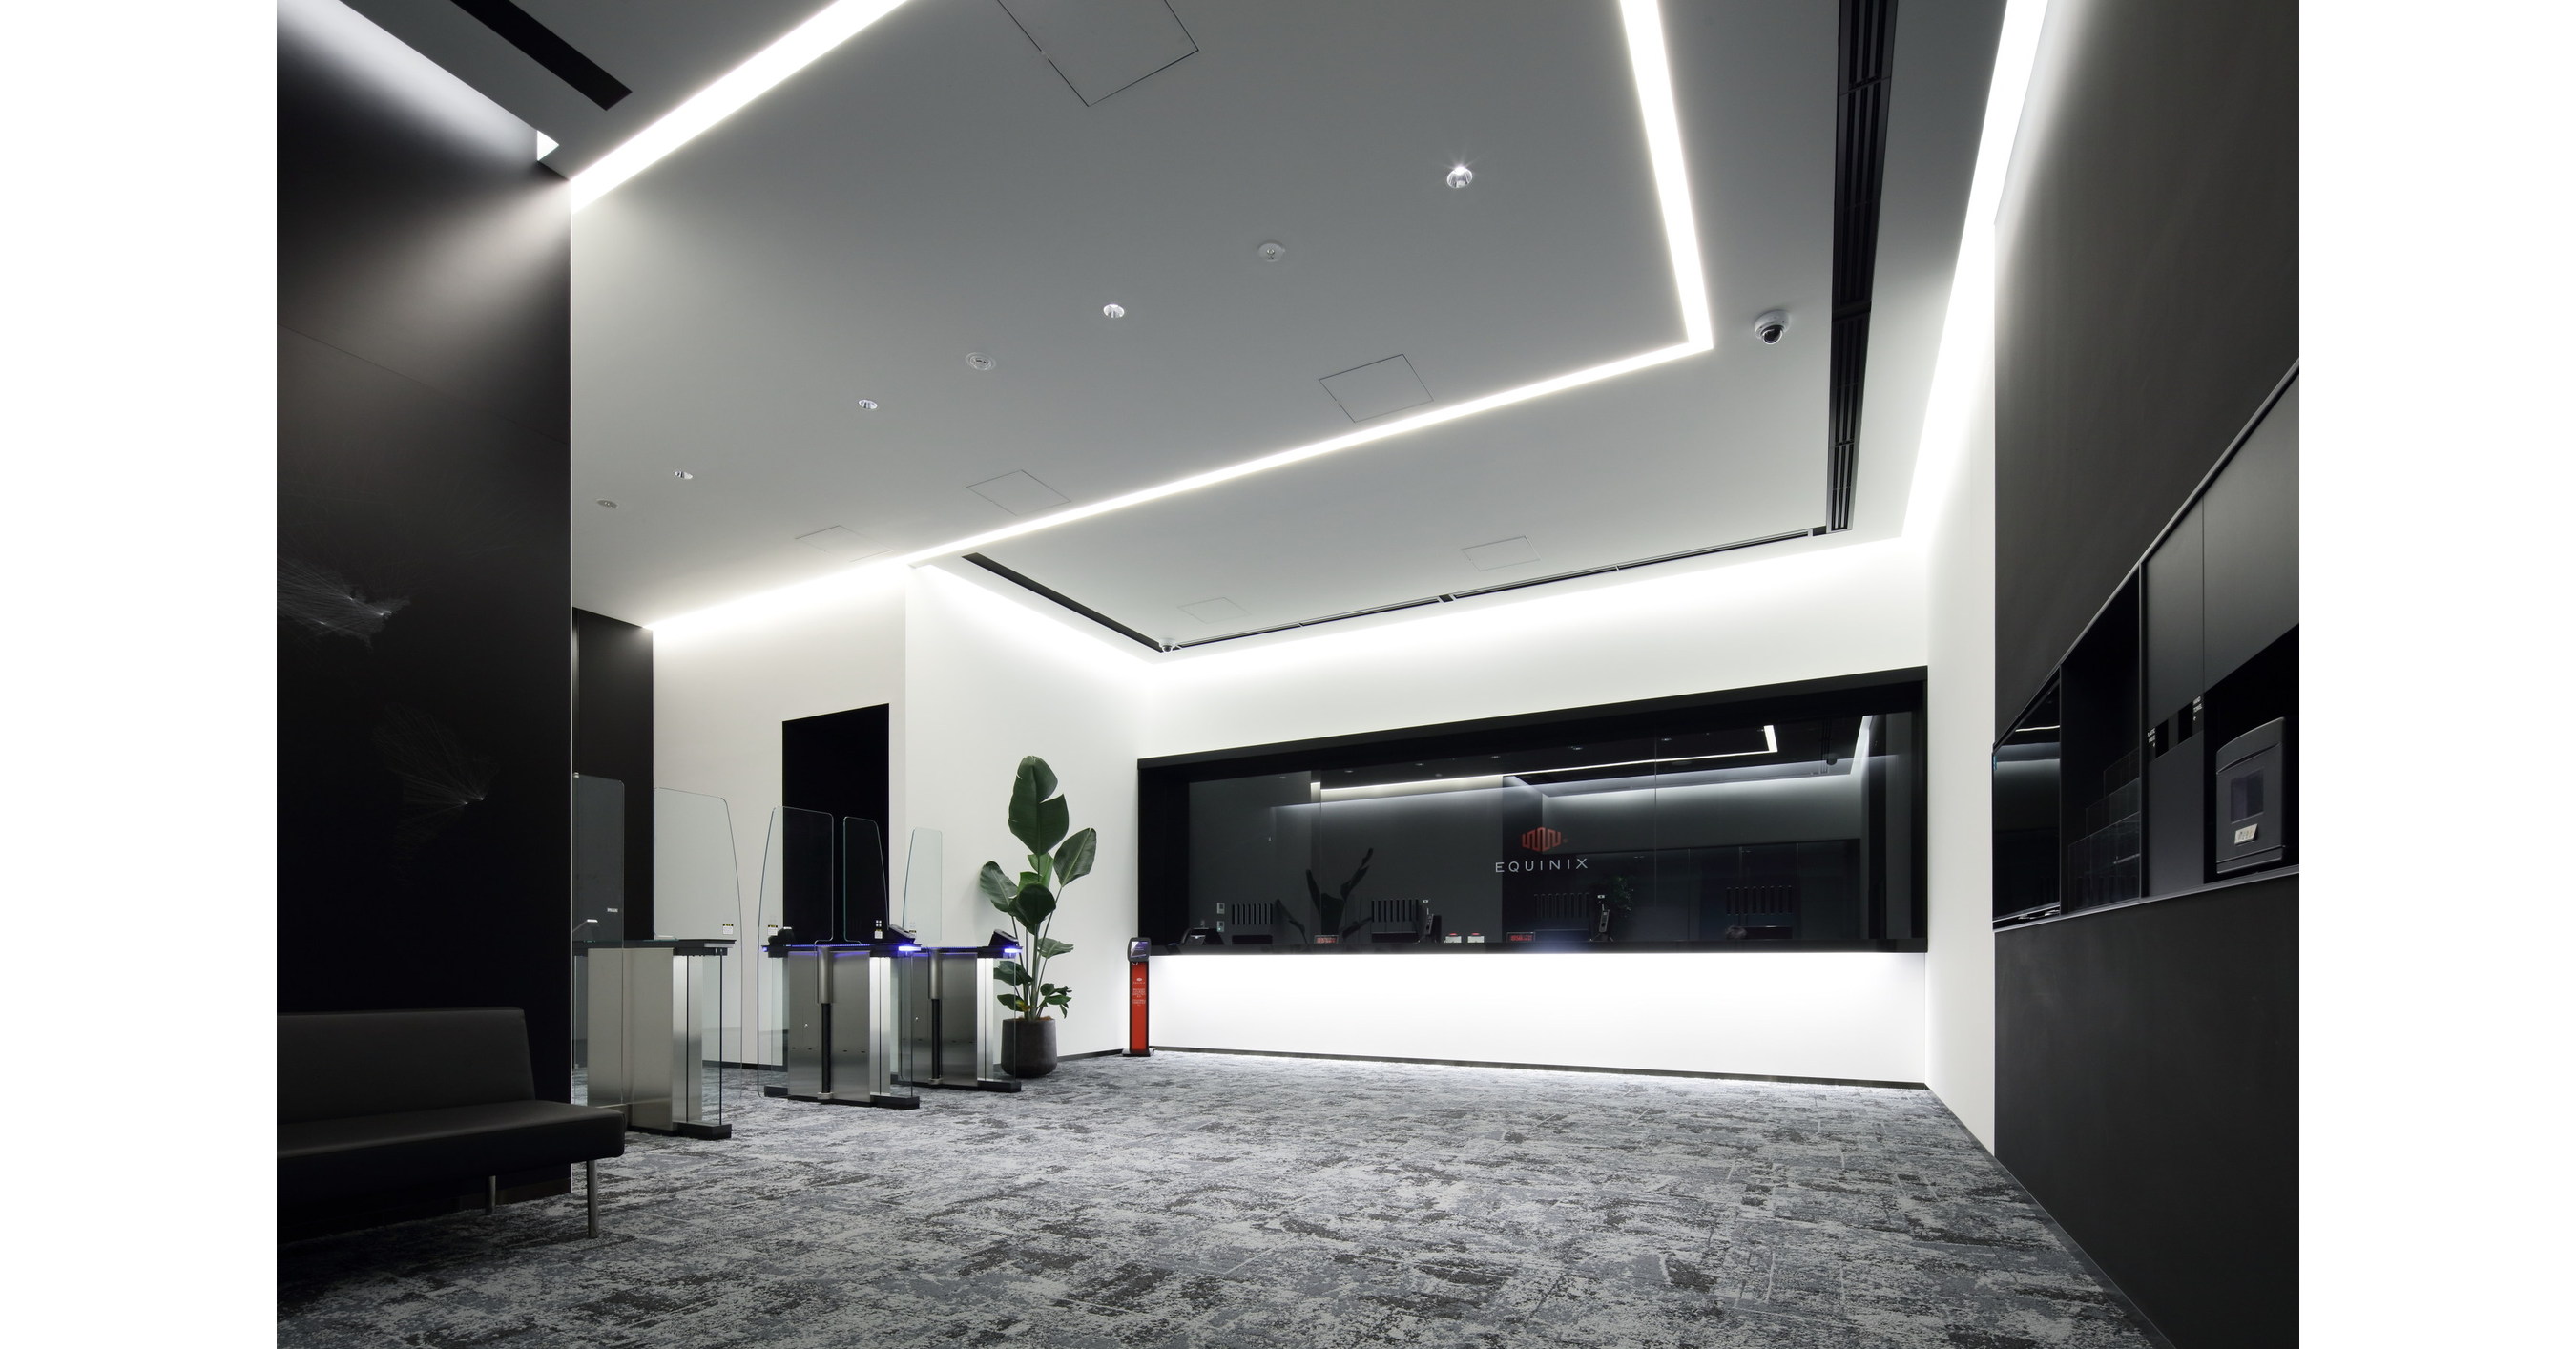 Equinix Opens Eleventh Data Center in Tokyo - Its Largest to Date in Japan